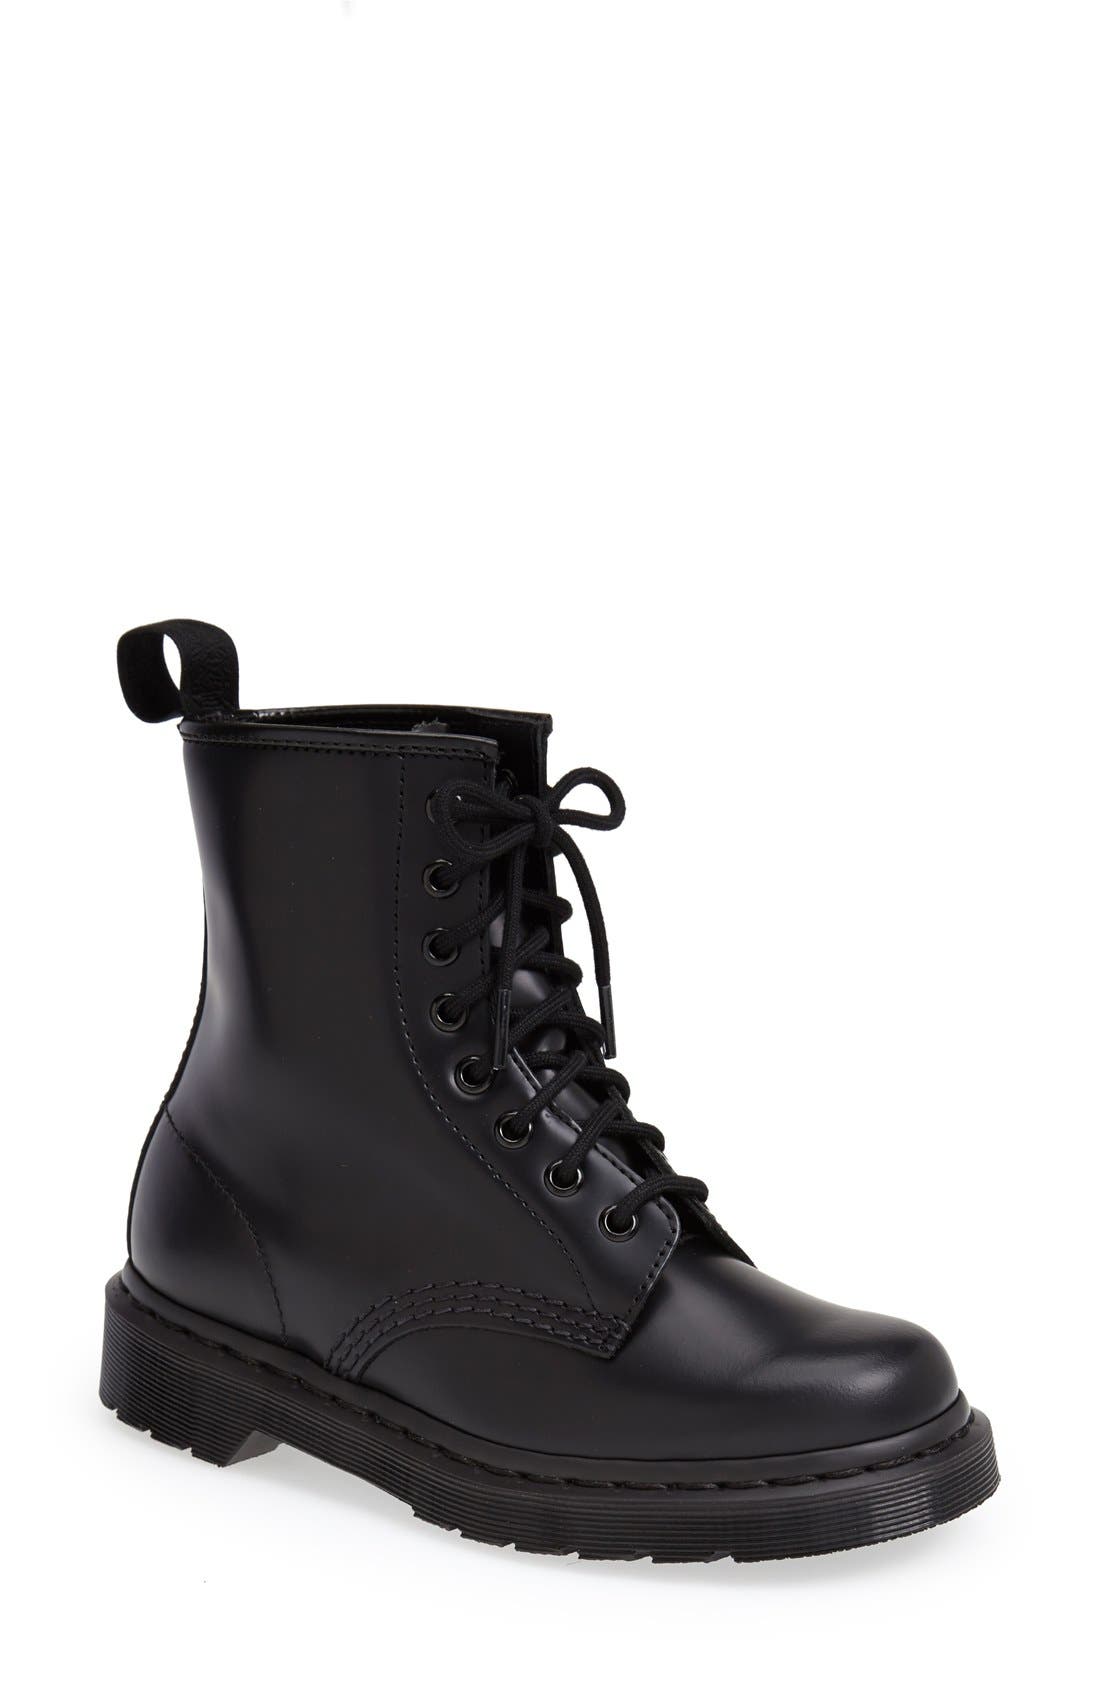 Dr. Martens '1460 Mono' Boot in Black Smooth at Nordstrom, Size 7Uk